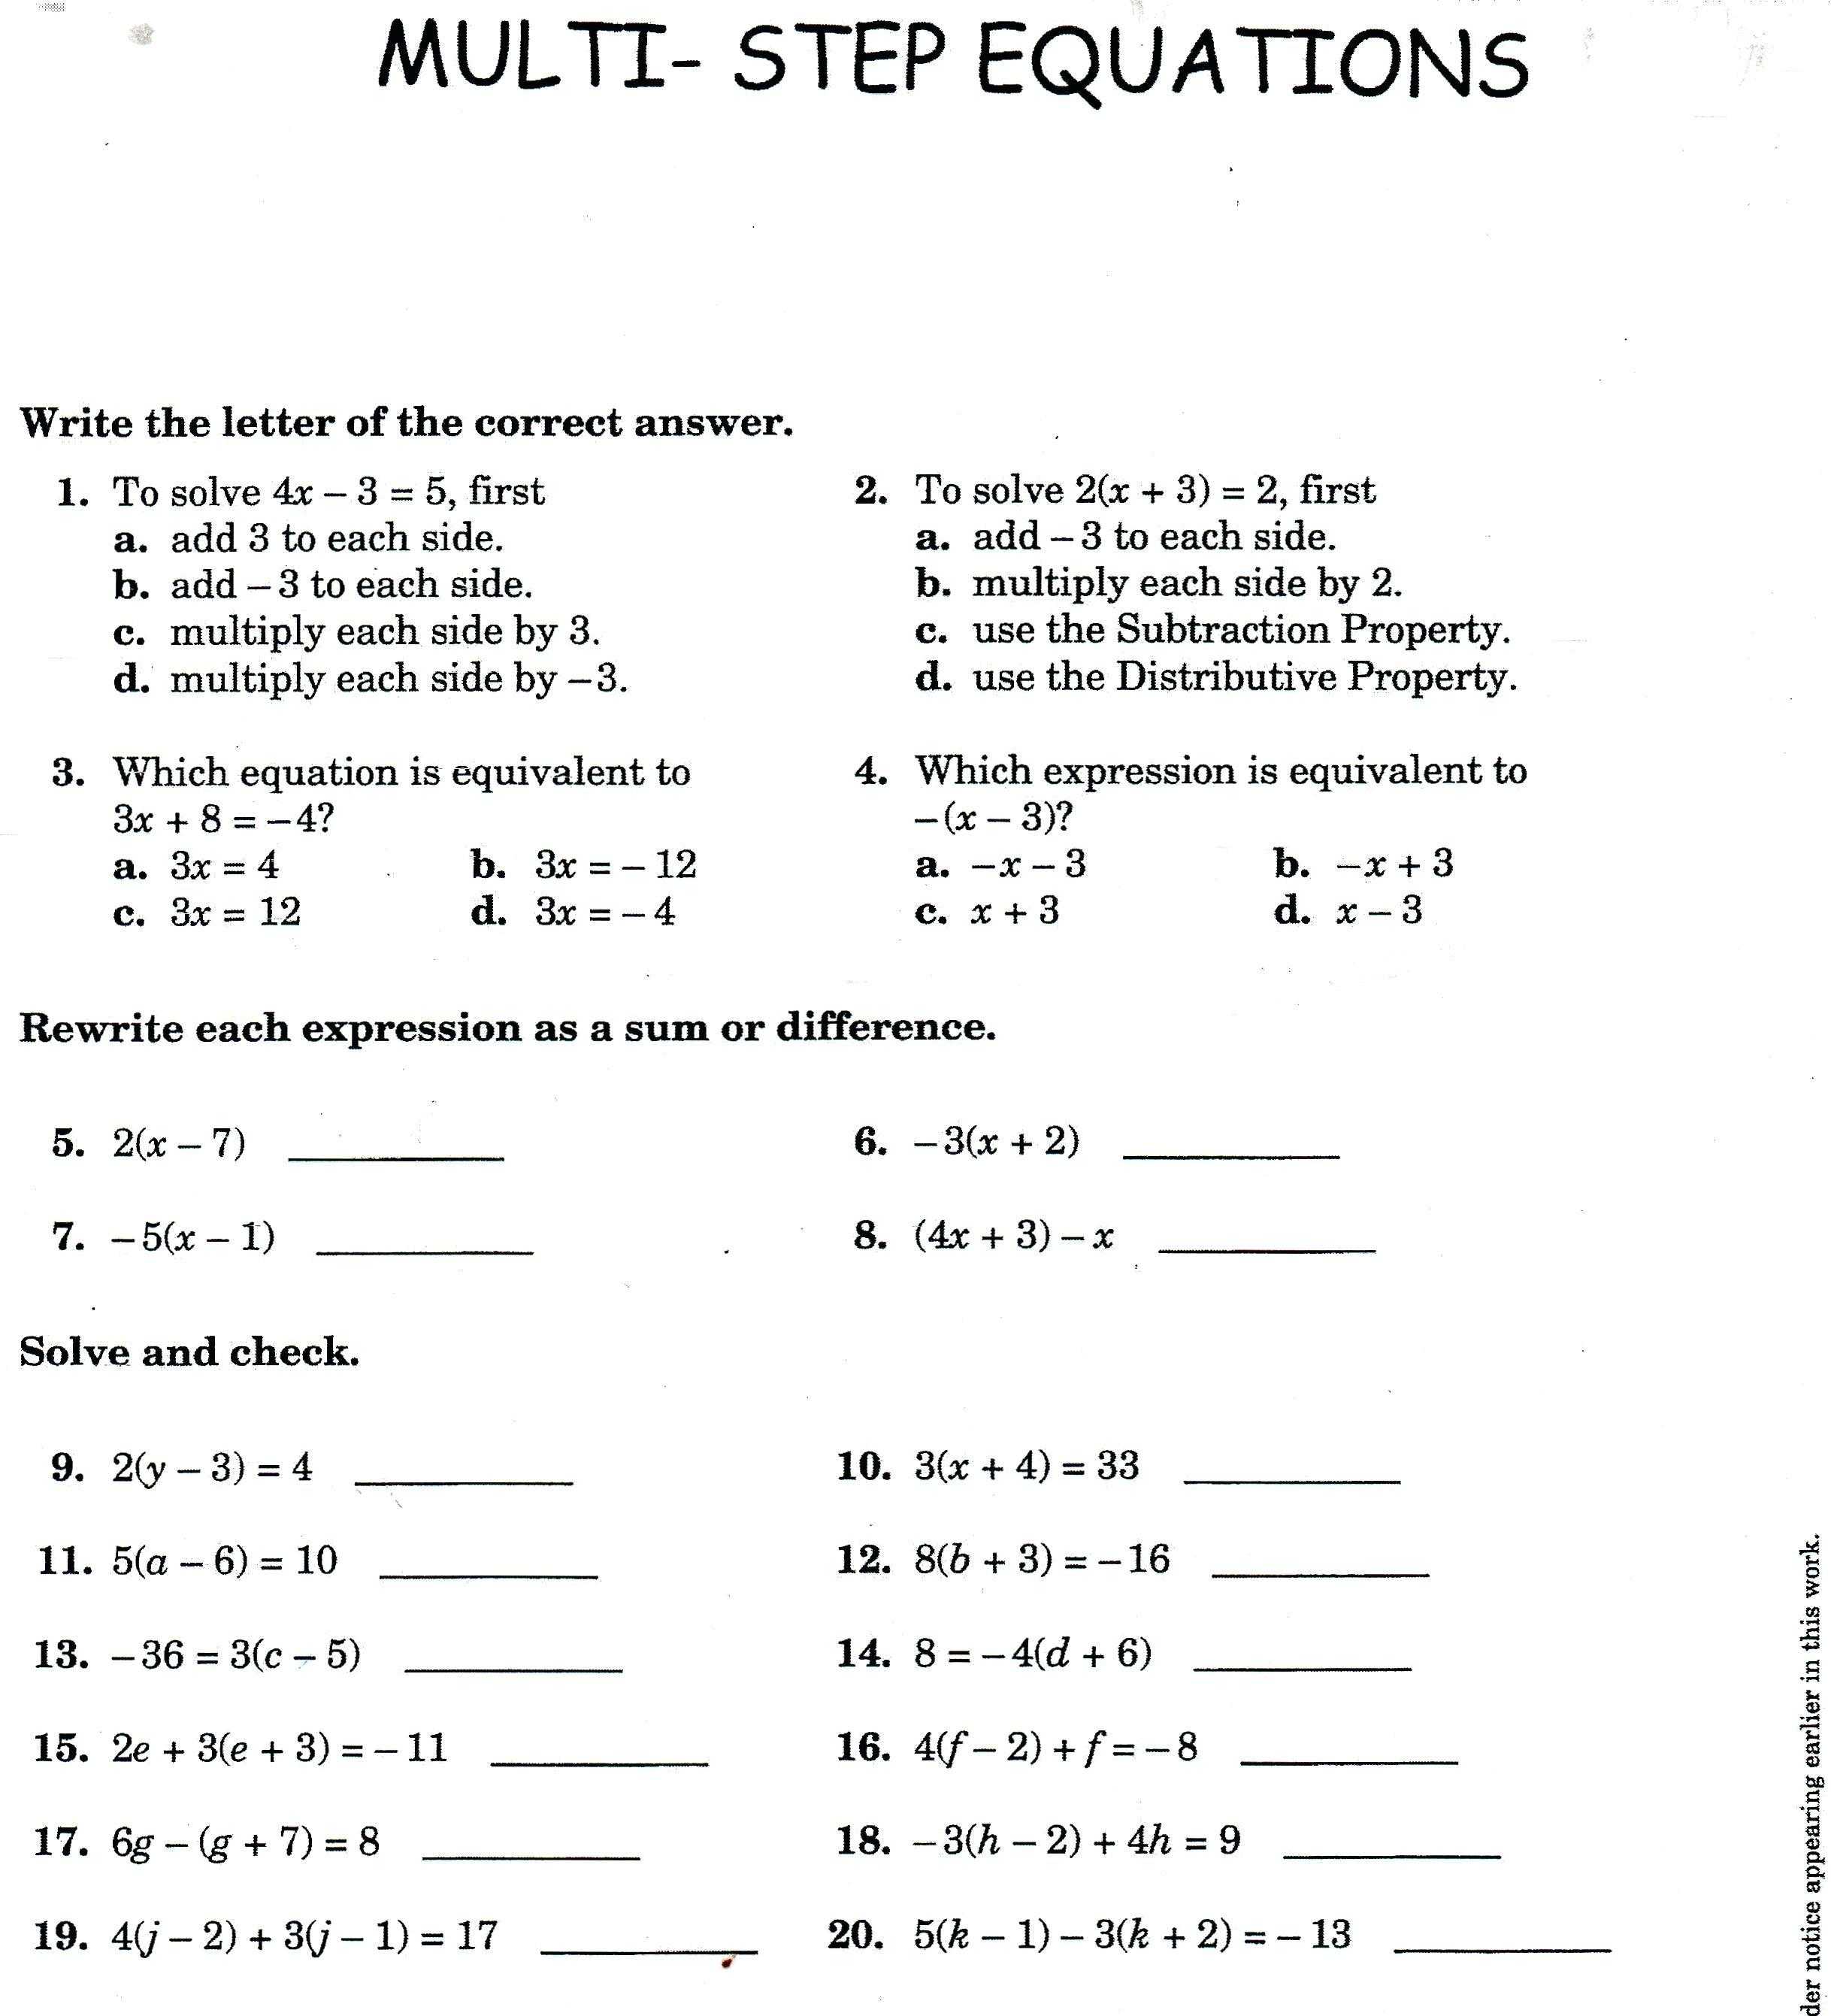 Solving Addition and Subtraction Equations Worksheets Answers together with Two Step Inequalities Worksheet Answers Gallery Worksheet Math for